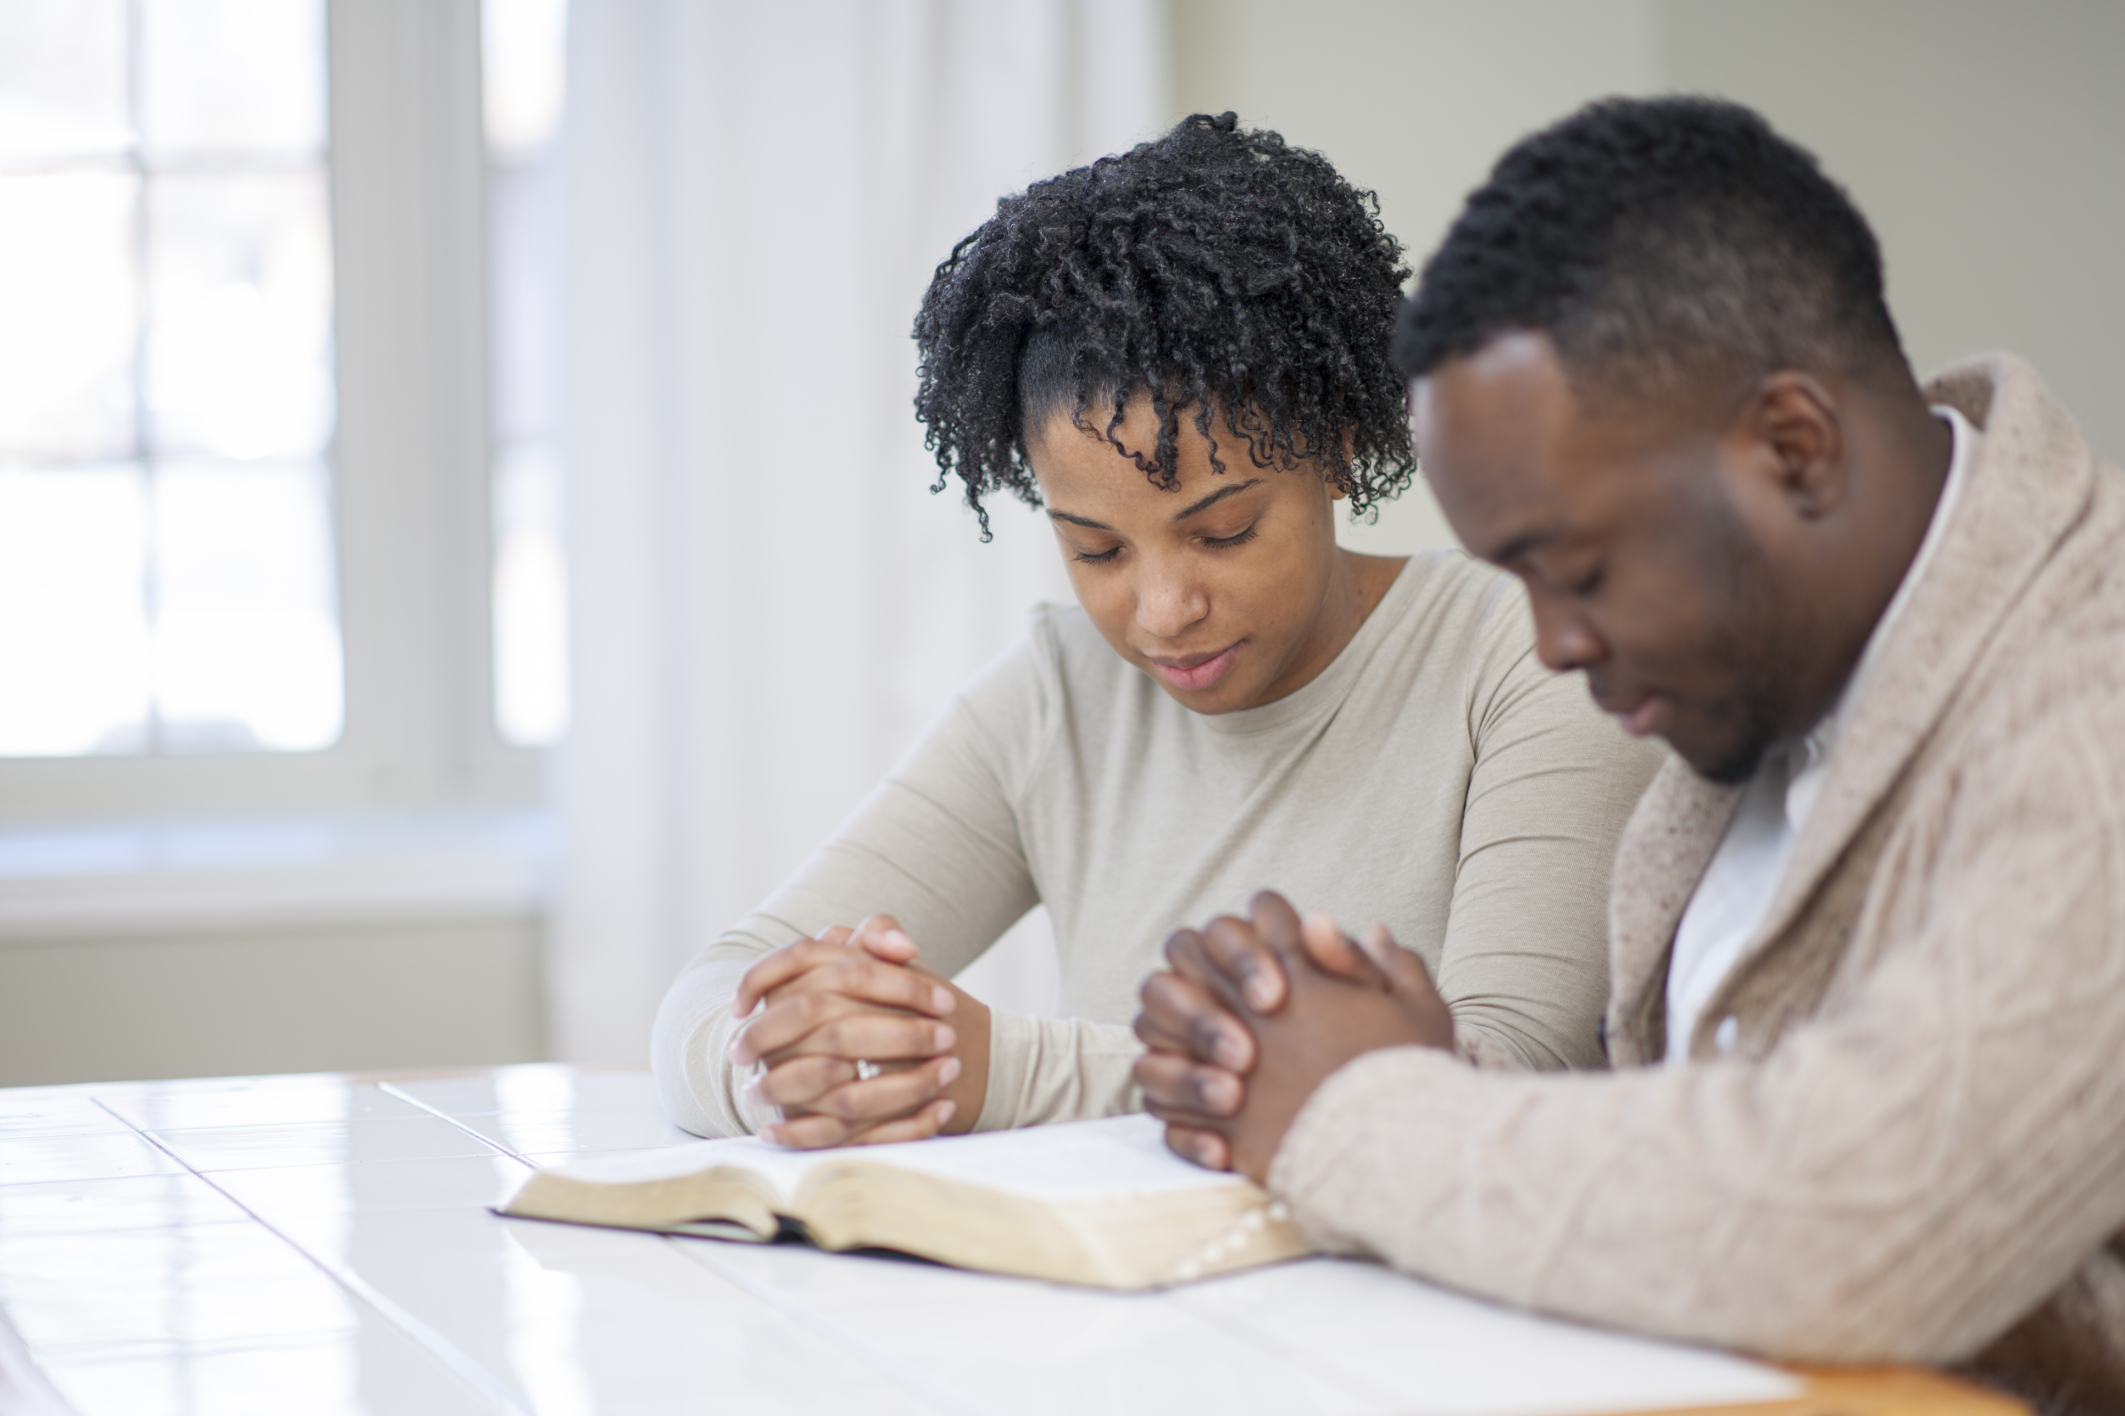 Religious Ethnic Couple Praying with a Bible